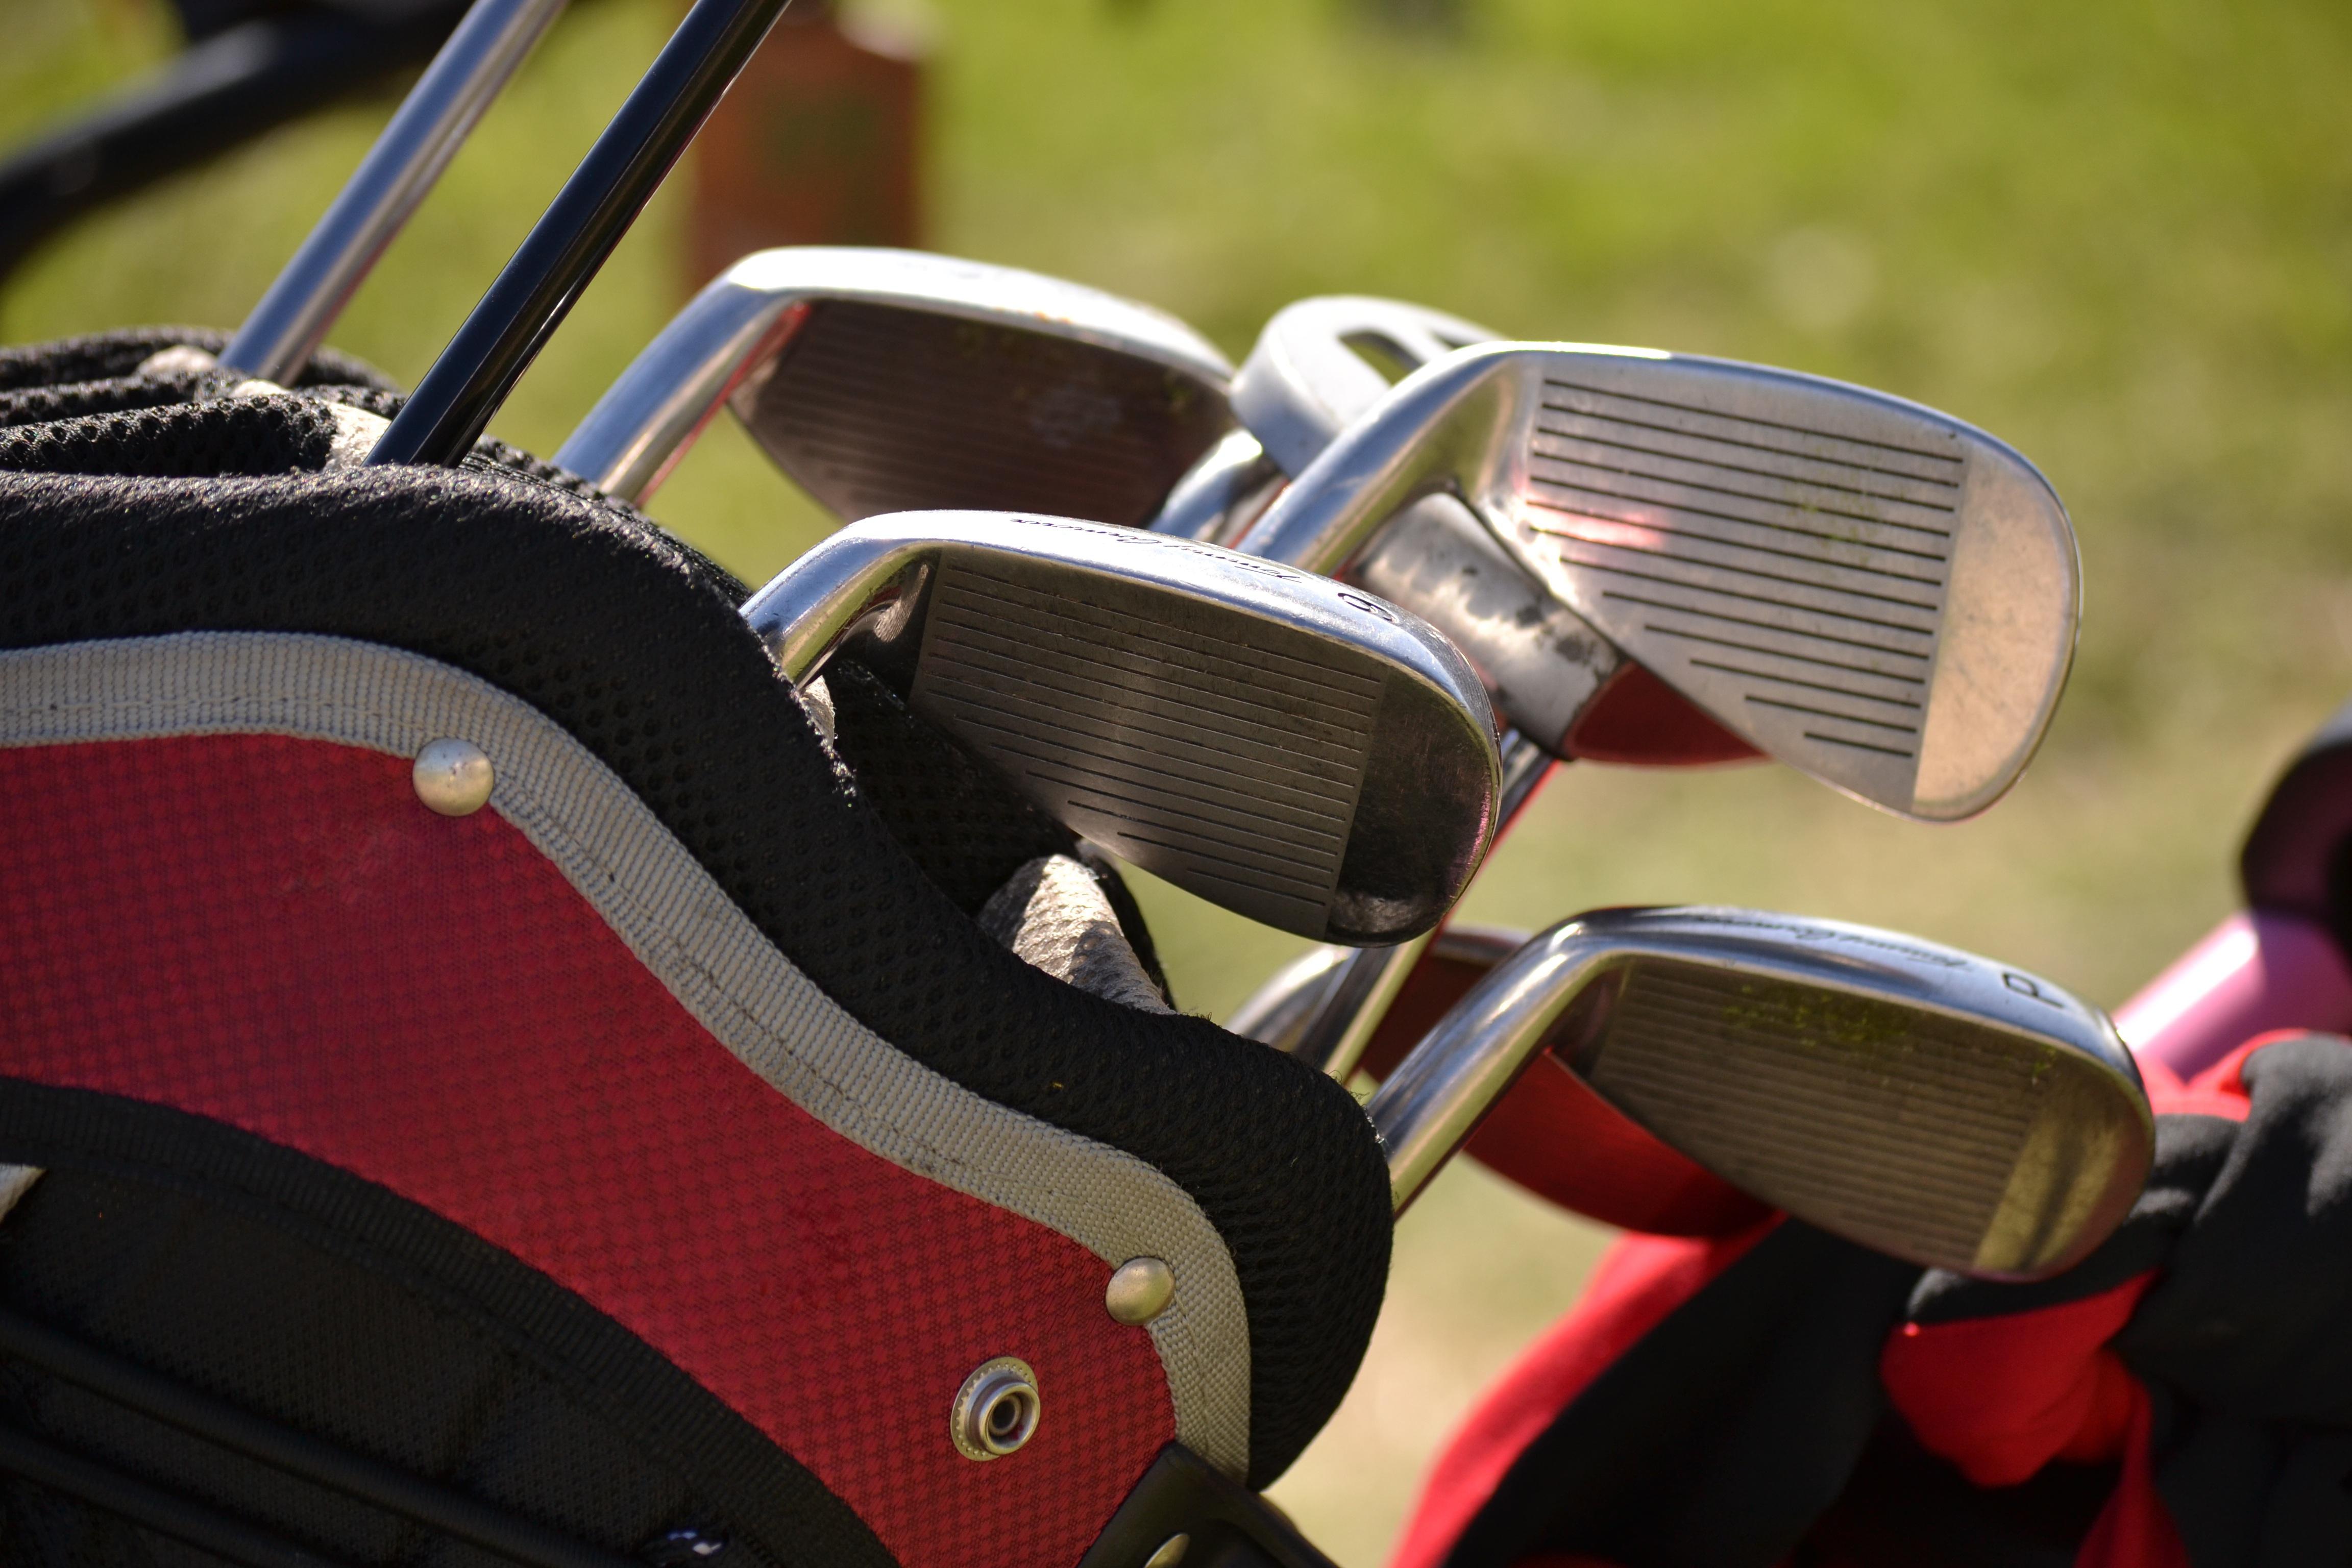 Consider the⁢ brand and quality of the clubs